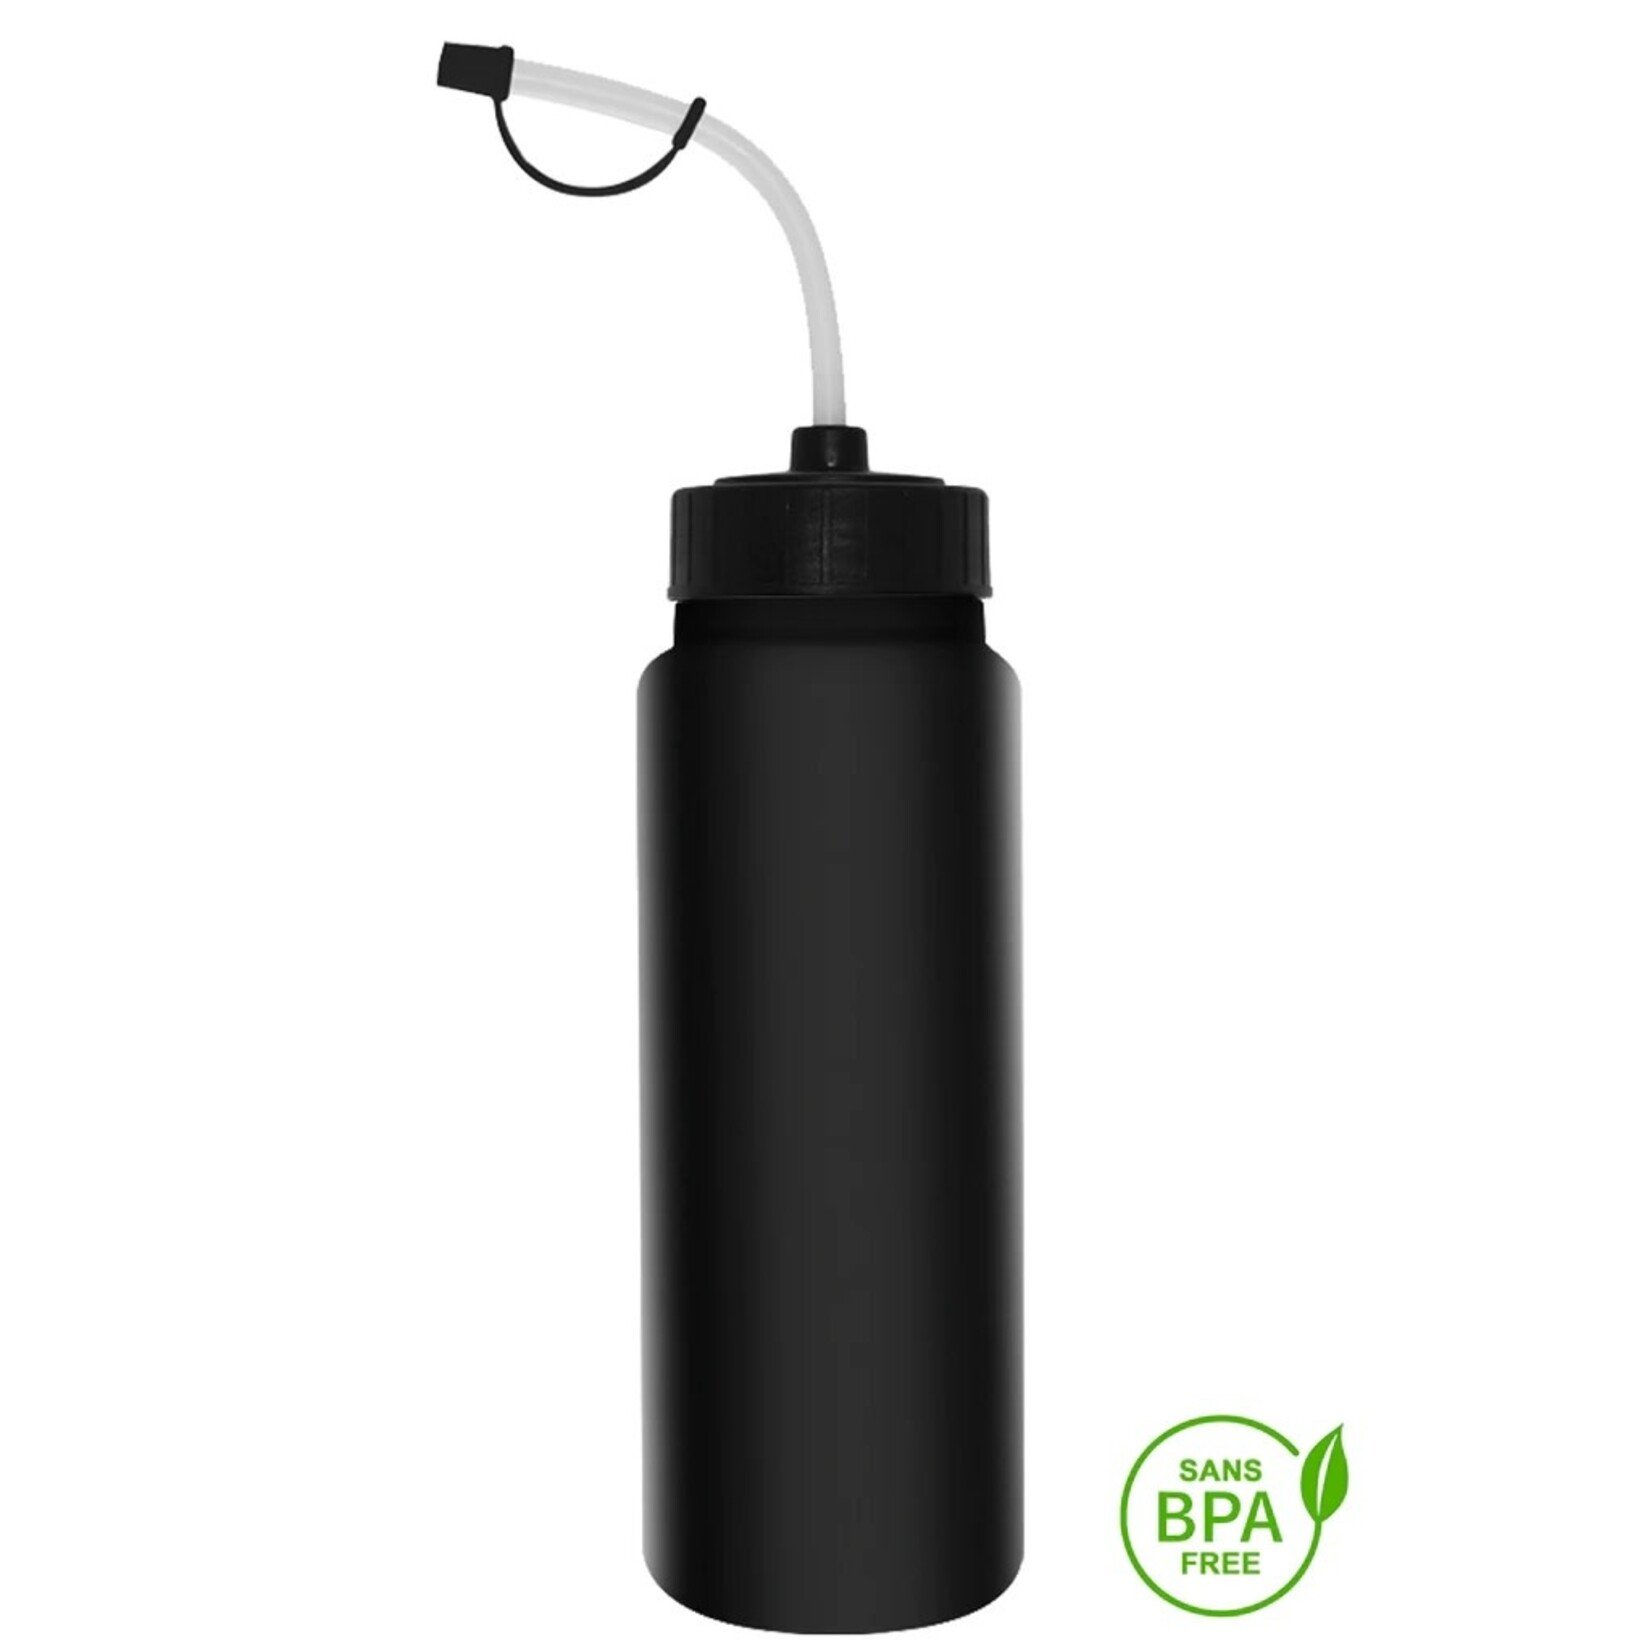 1000ml Tallboy Black Water Bottle With Flexible Noodle Straw Top